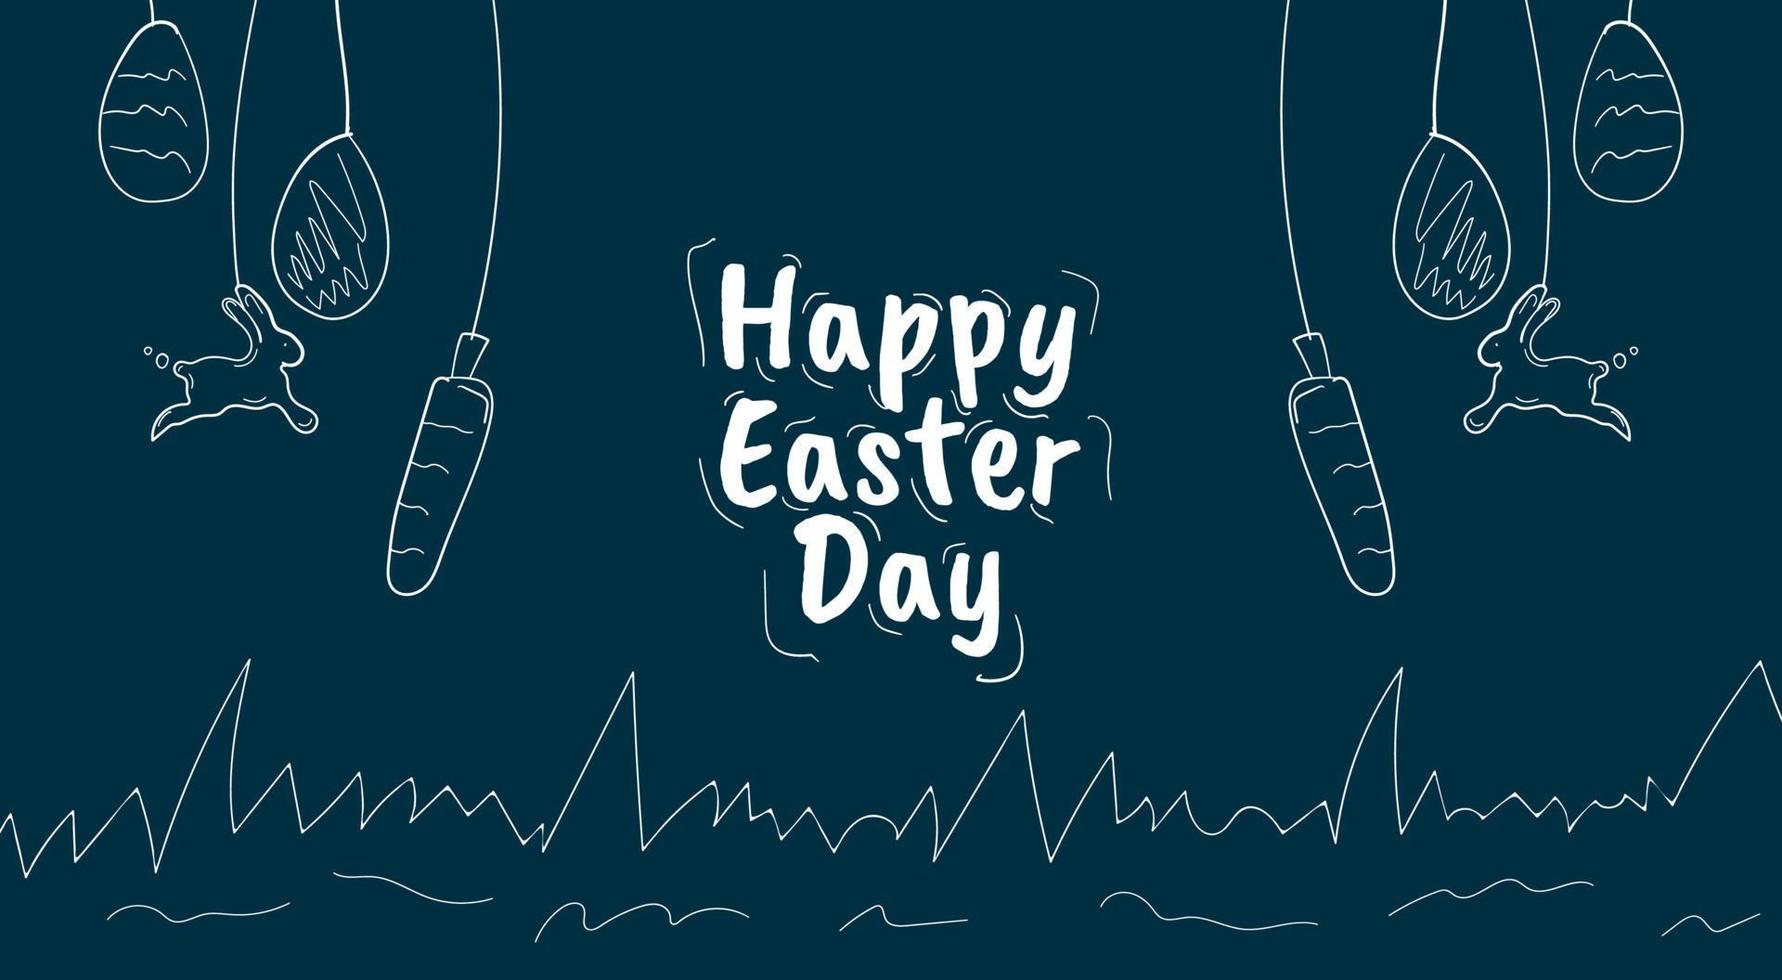 Happy Easter day banner and greeting design in white hand drawn style vector